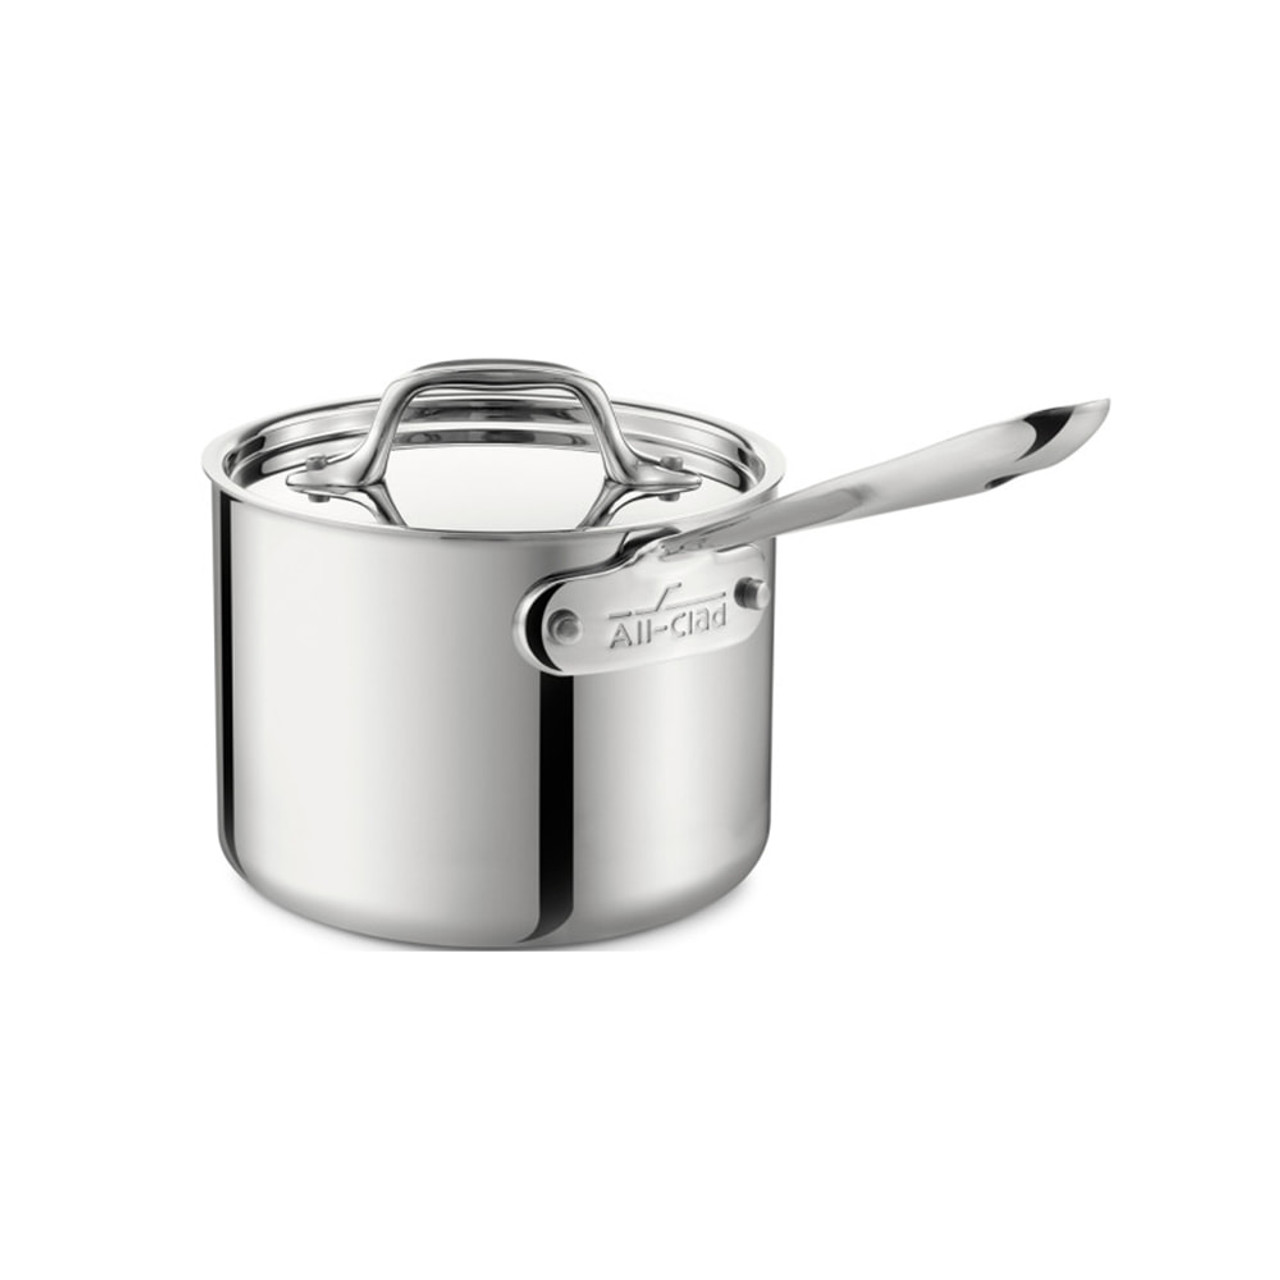 https://cdn11.bigcommerce.com/s-hccytny0od/images/stencil/1280x1280/products/498/1868/all-clad-stainless-steel-sauce-pan-2qt__92654.1588444278.jpg?c=2?imbypass=on